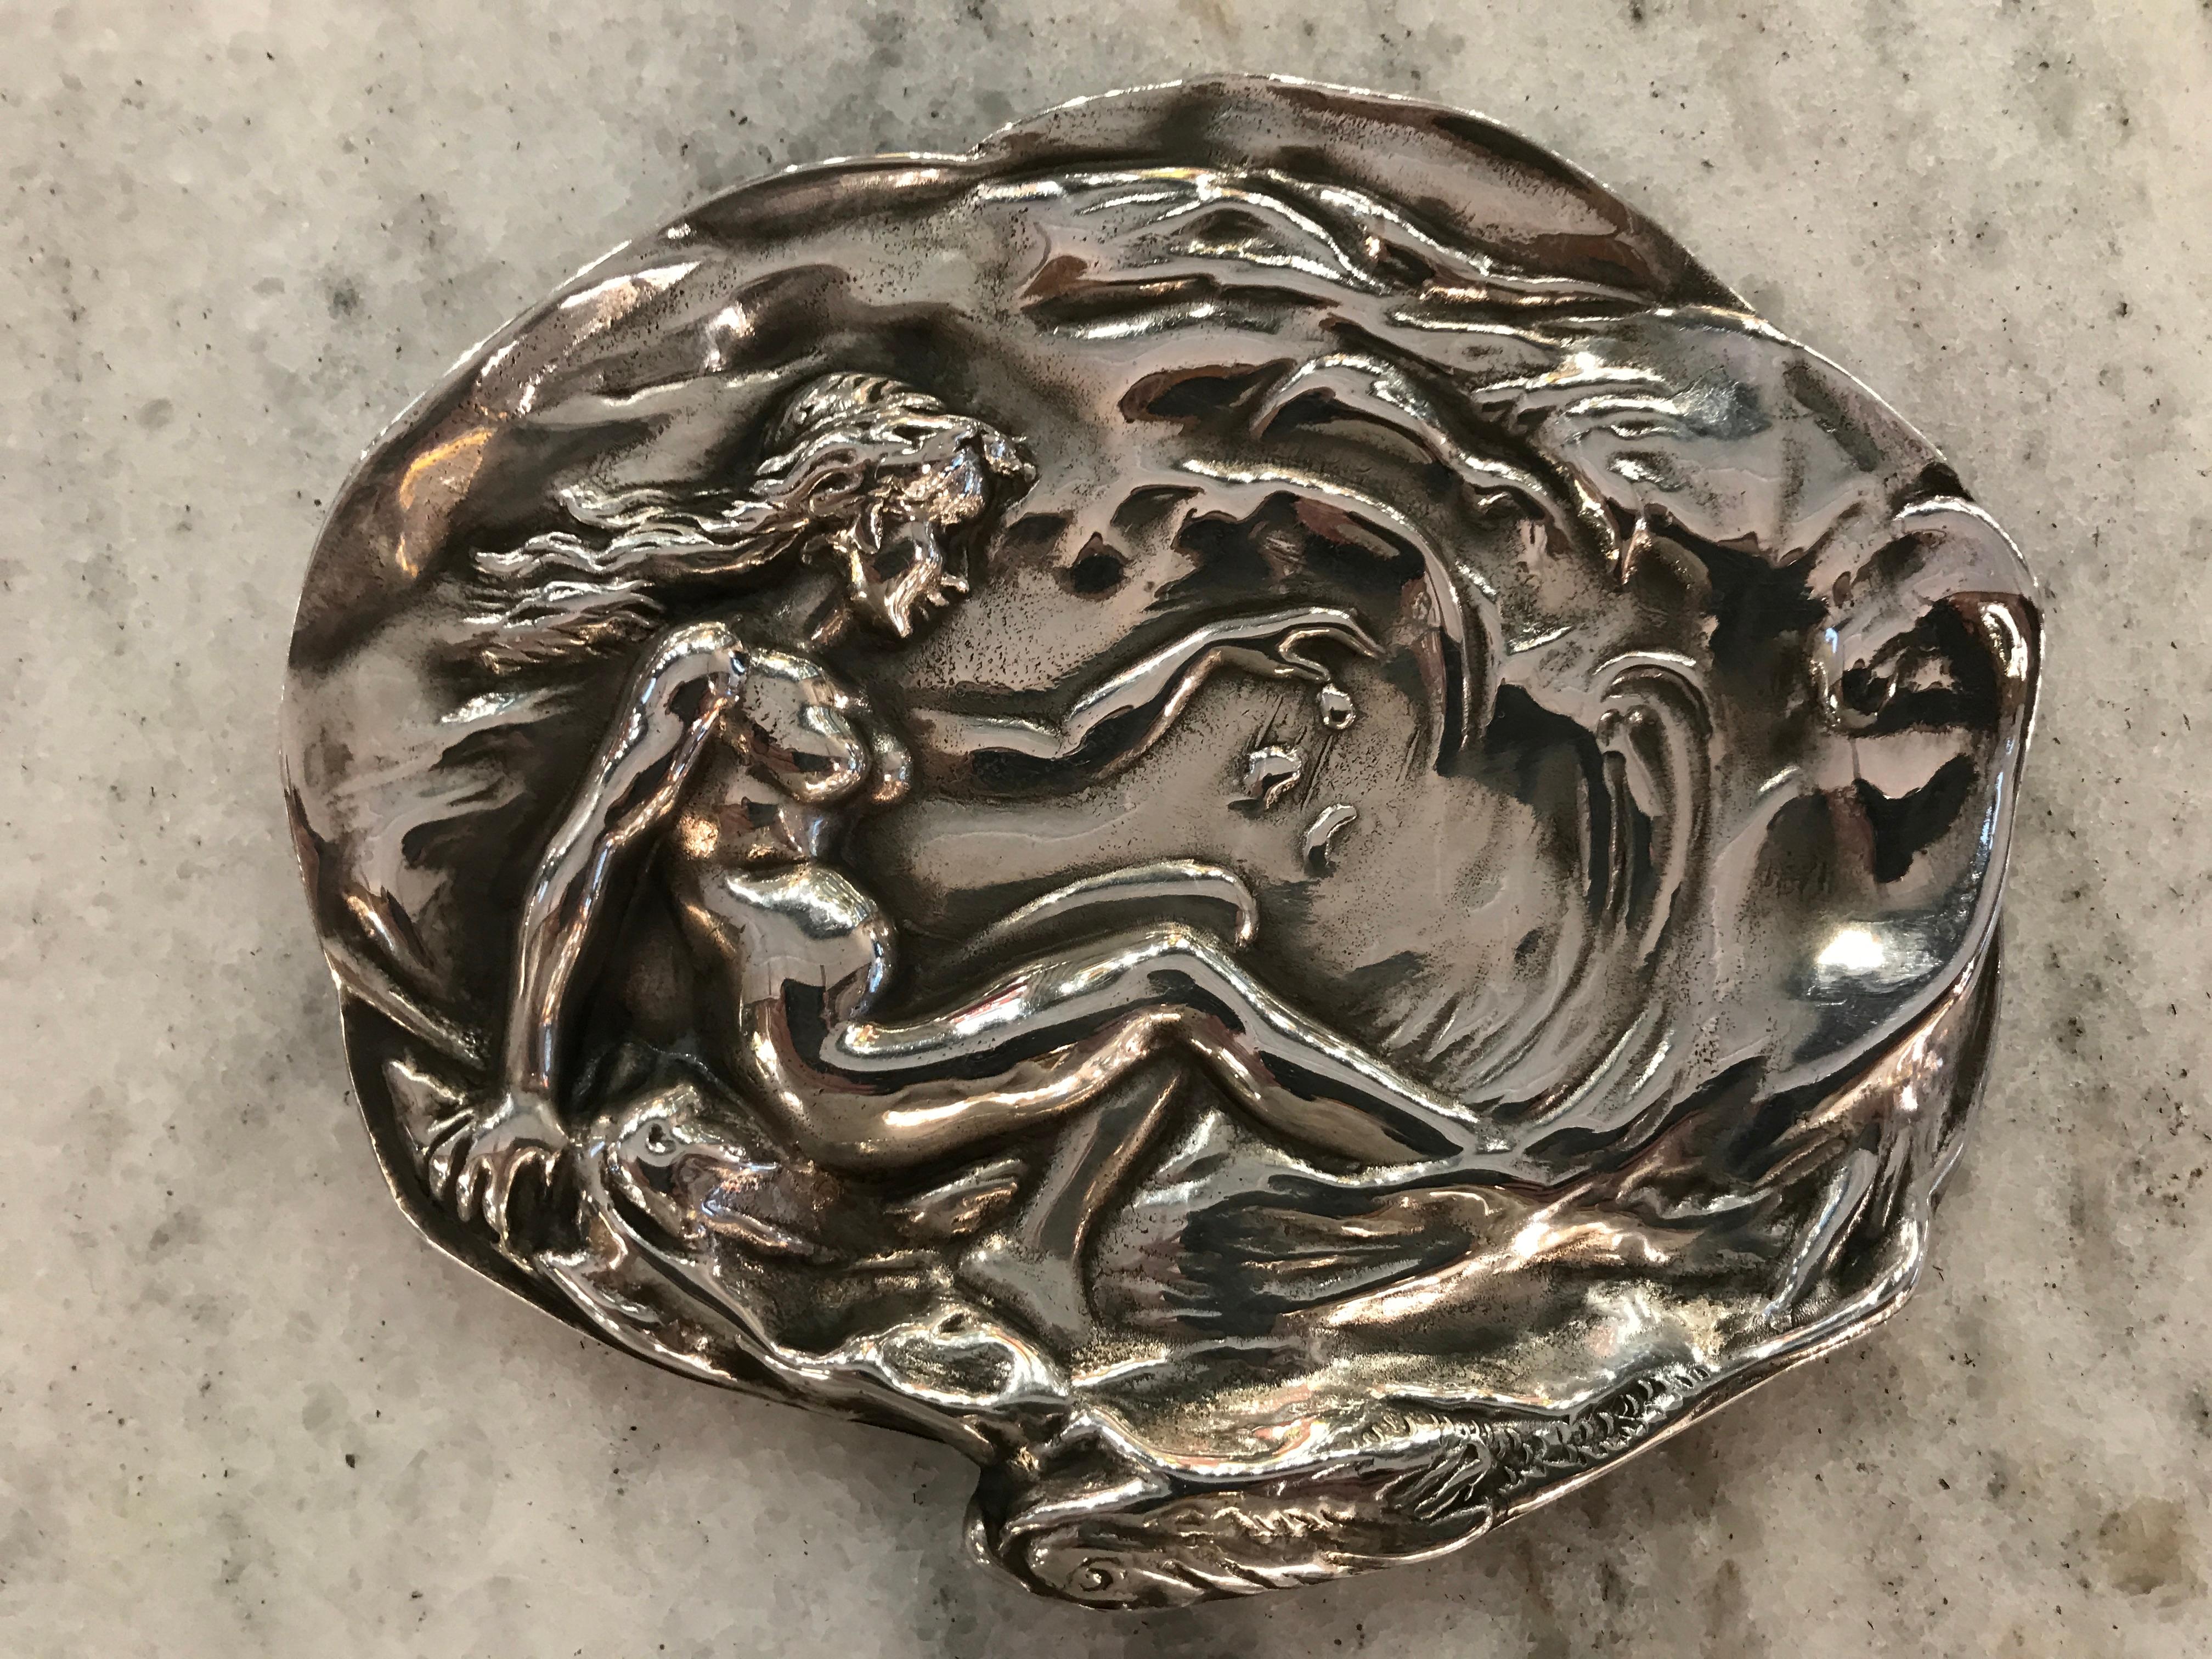 Visiting card Tray, France

We have specialized in the sale of Art Deco and Art Nouveau and Vintage styles since 1982. If you have any questions we are at your disposal.
Pushing the button that reads 'View All From Seller'. And you can see more